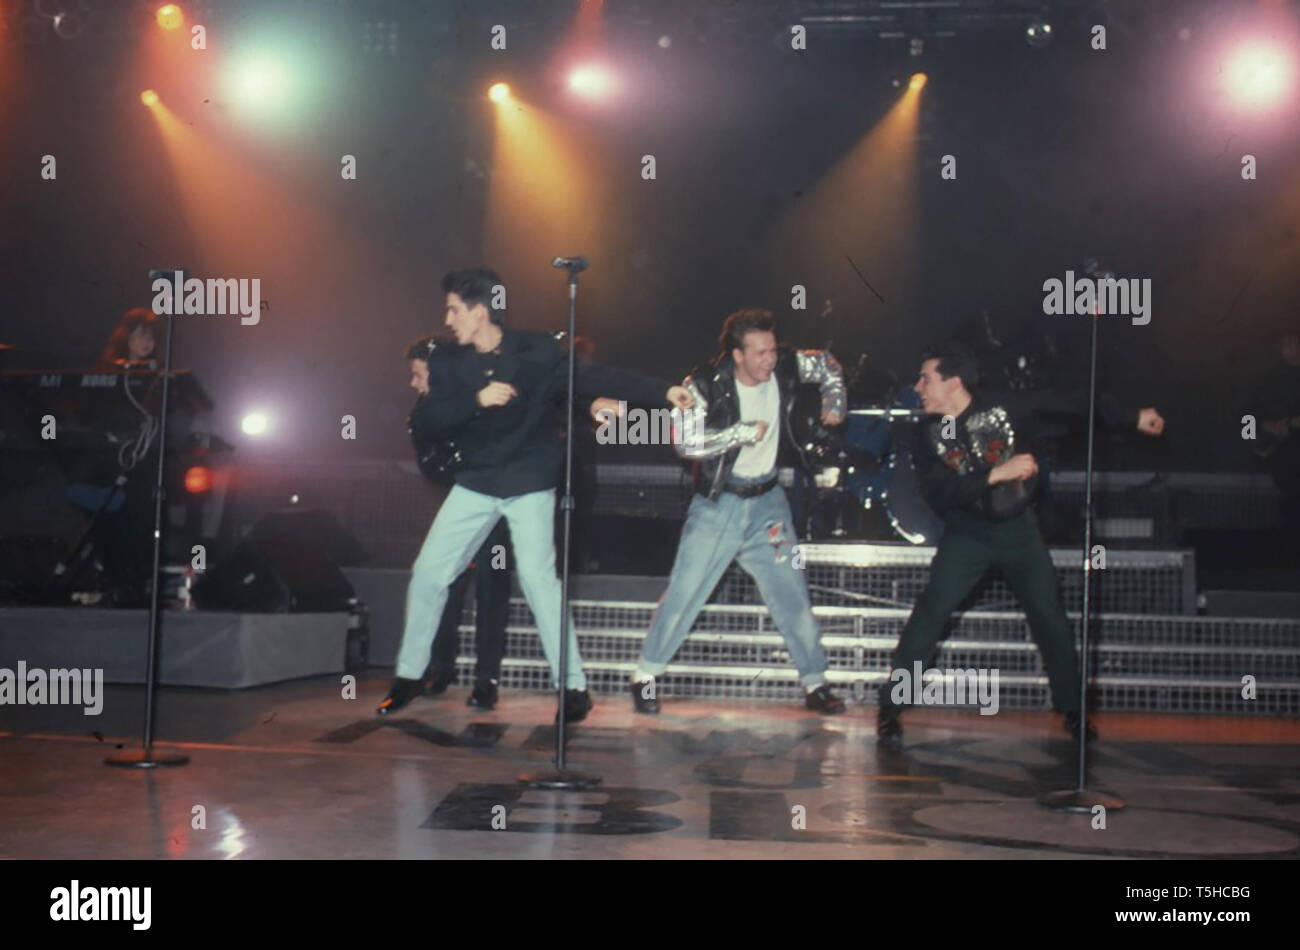 NEW KIDS ON THE BLOCK American boy band about 1990 Stock Photo